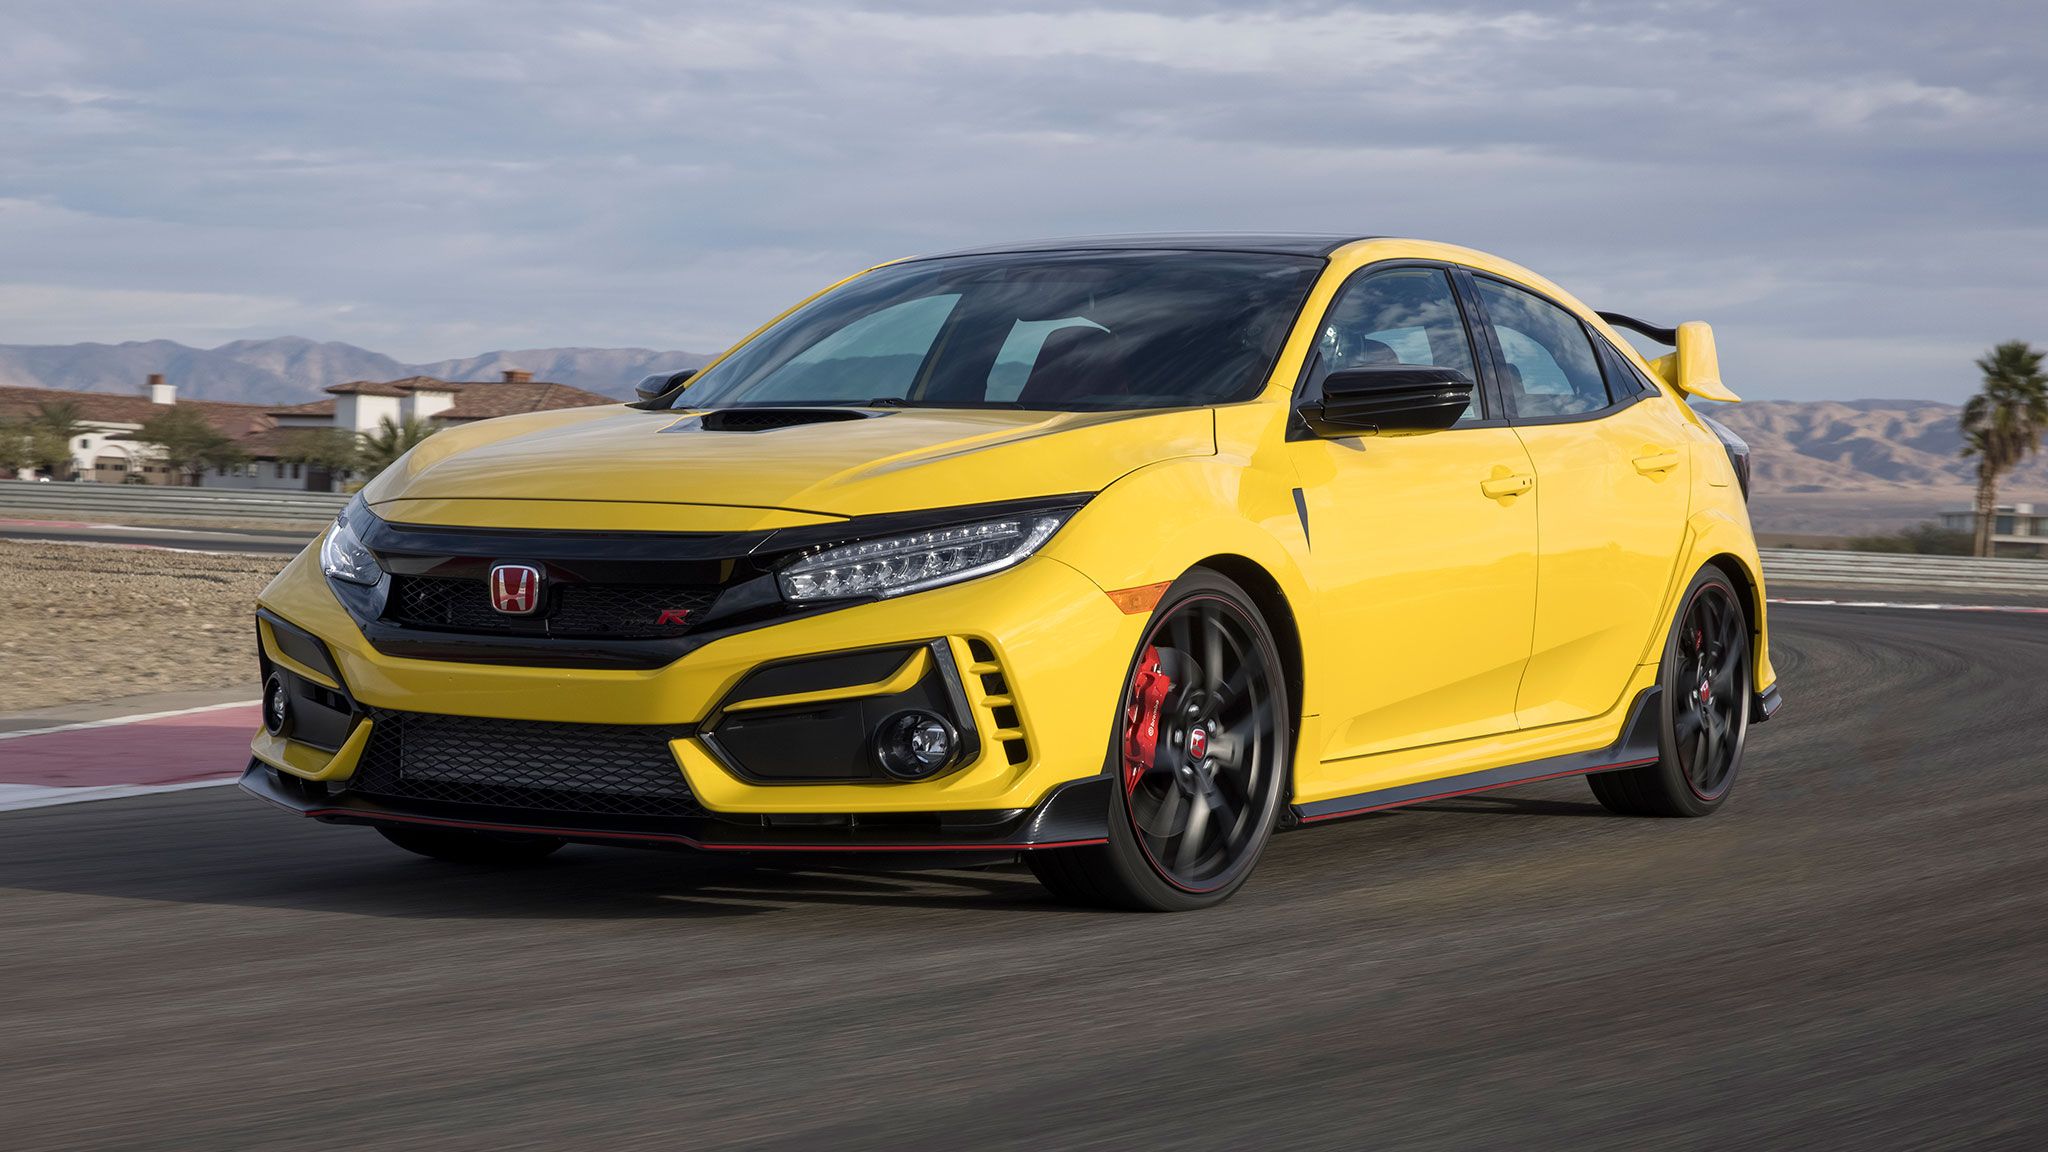 Honda Civic Type R Limited Edition Test: The Best Gets Better